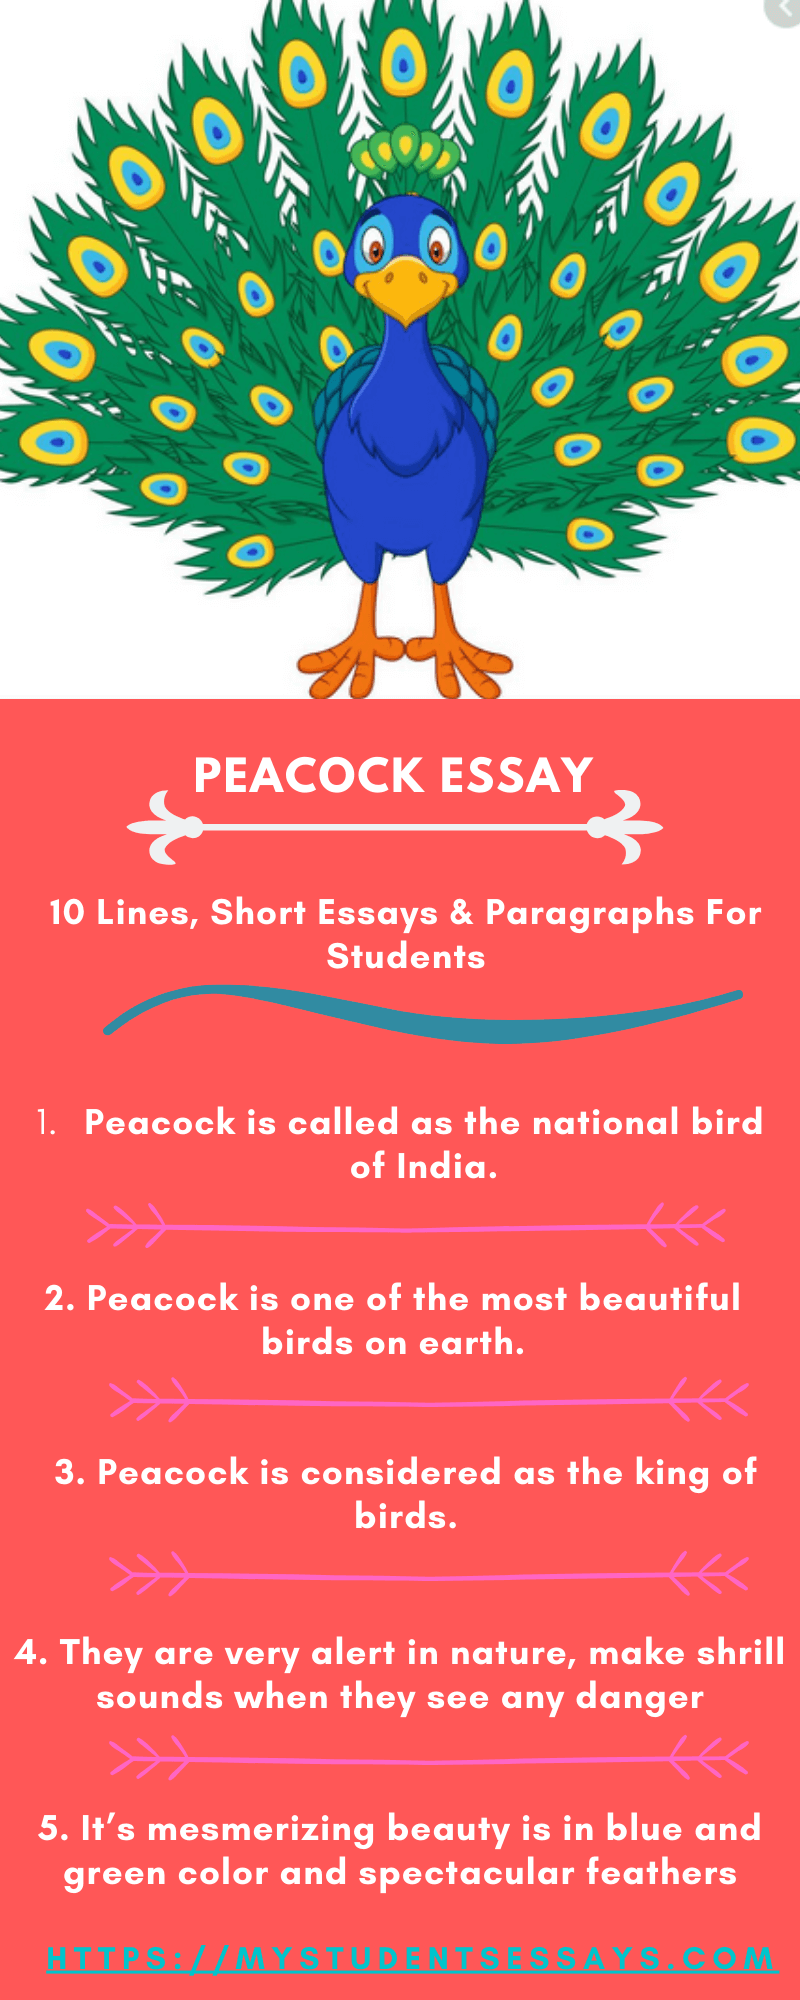 Peacock Essay | 10 Lines, Short Essay & Paragraph For Students